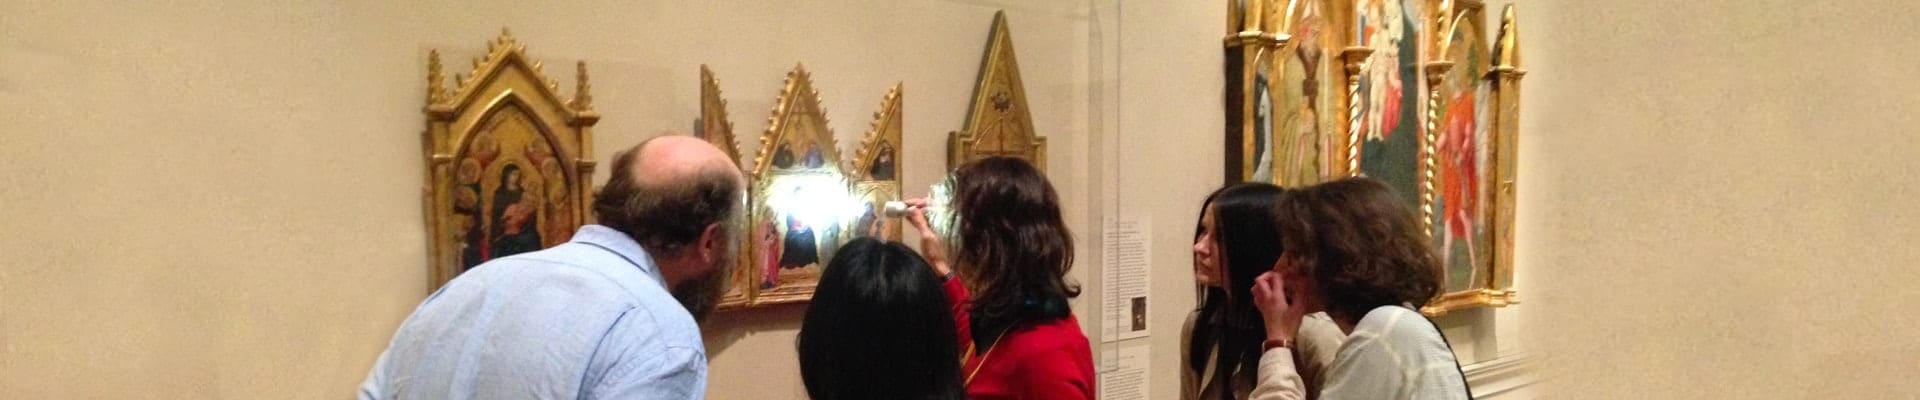 Graduate students in Image, Theory, Matter in Medieval Visual Culture seminar, examining a painting at the Walters Art Museum